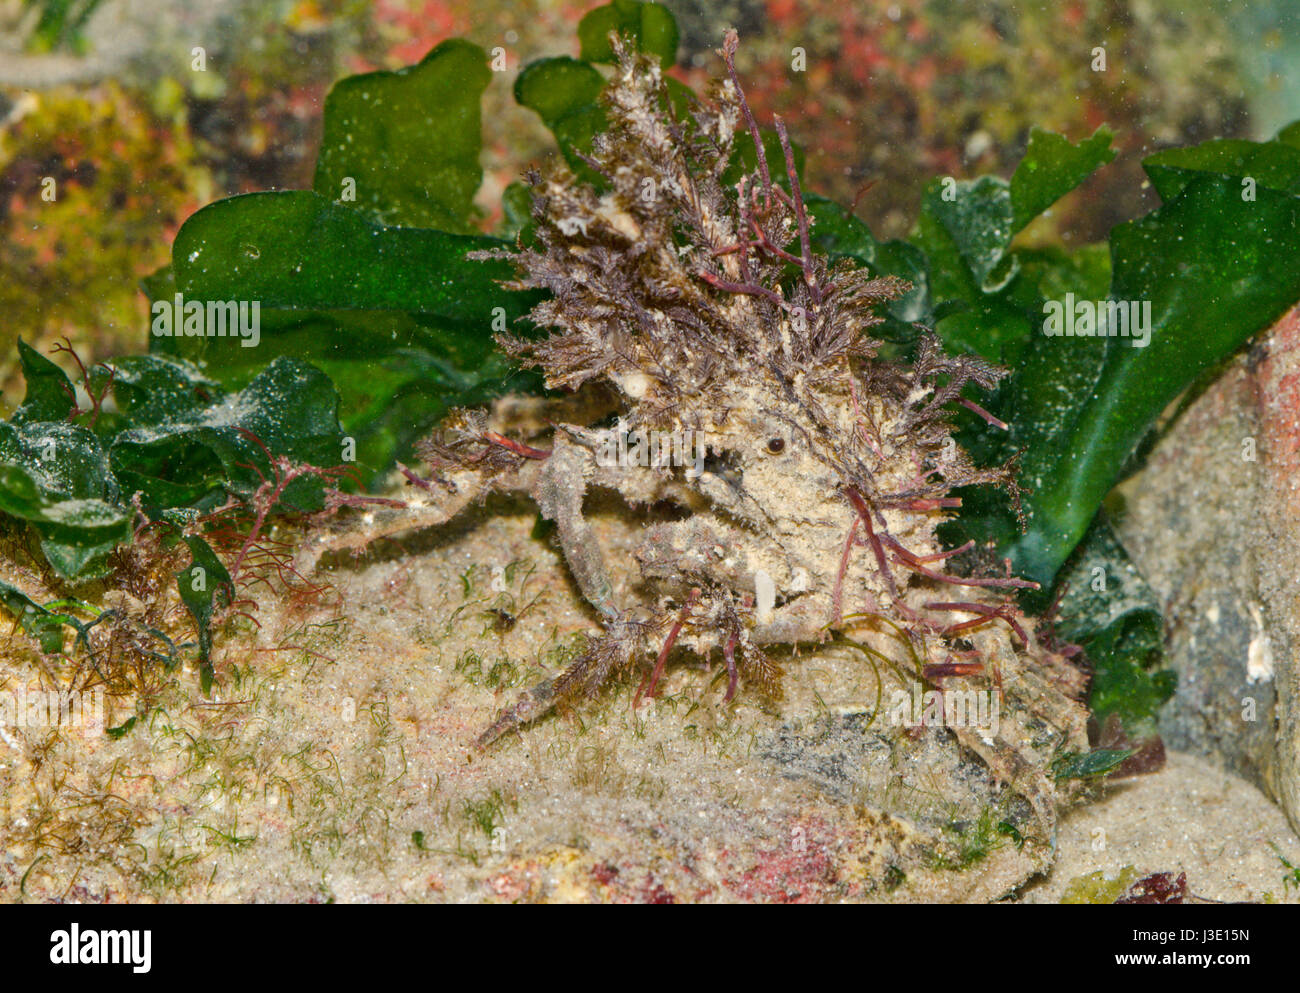 Camouflaged Spider Crab decorated with seaweed Stock Photo